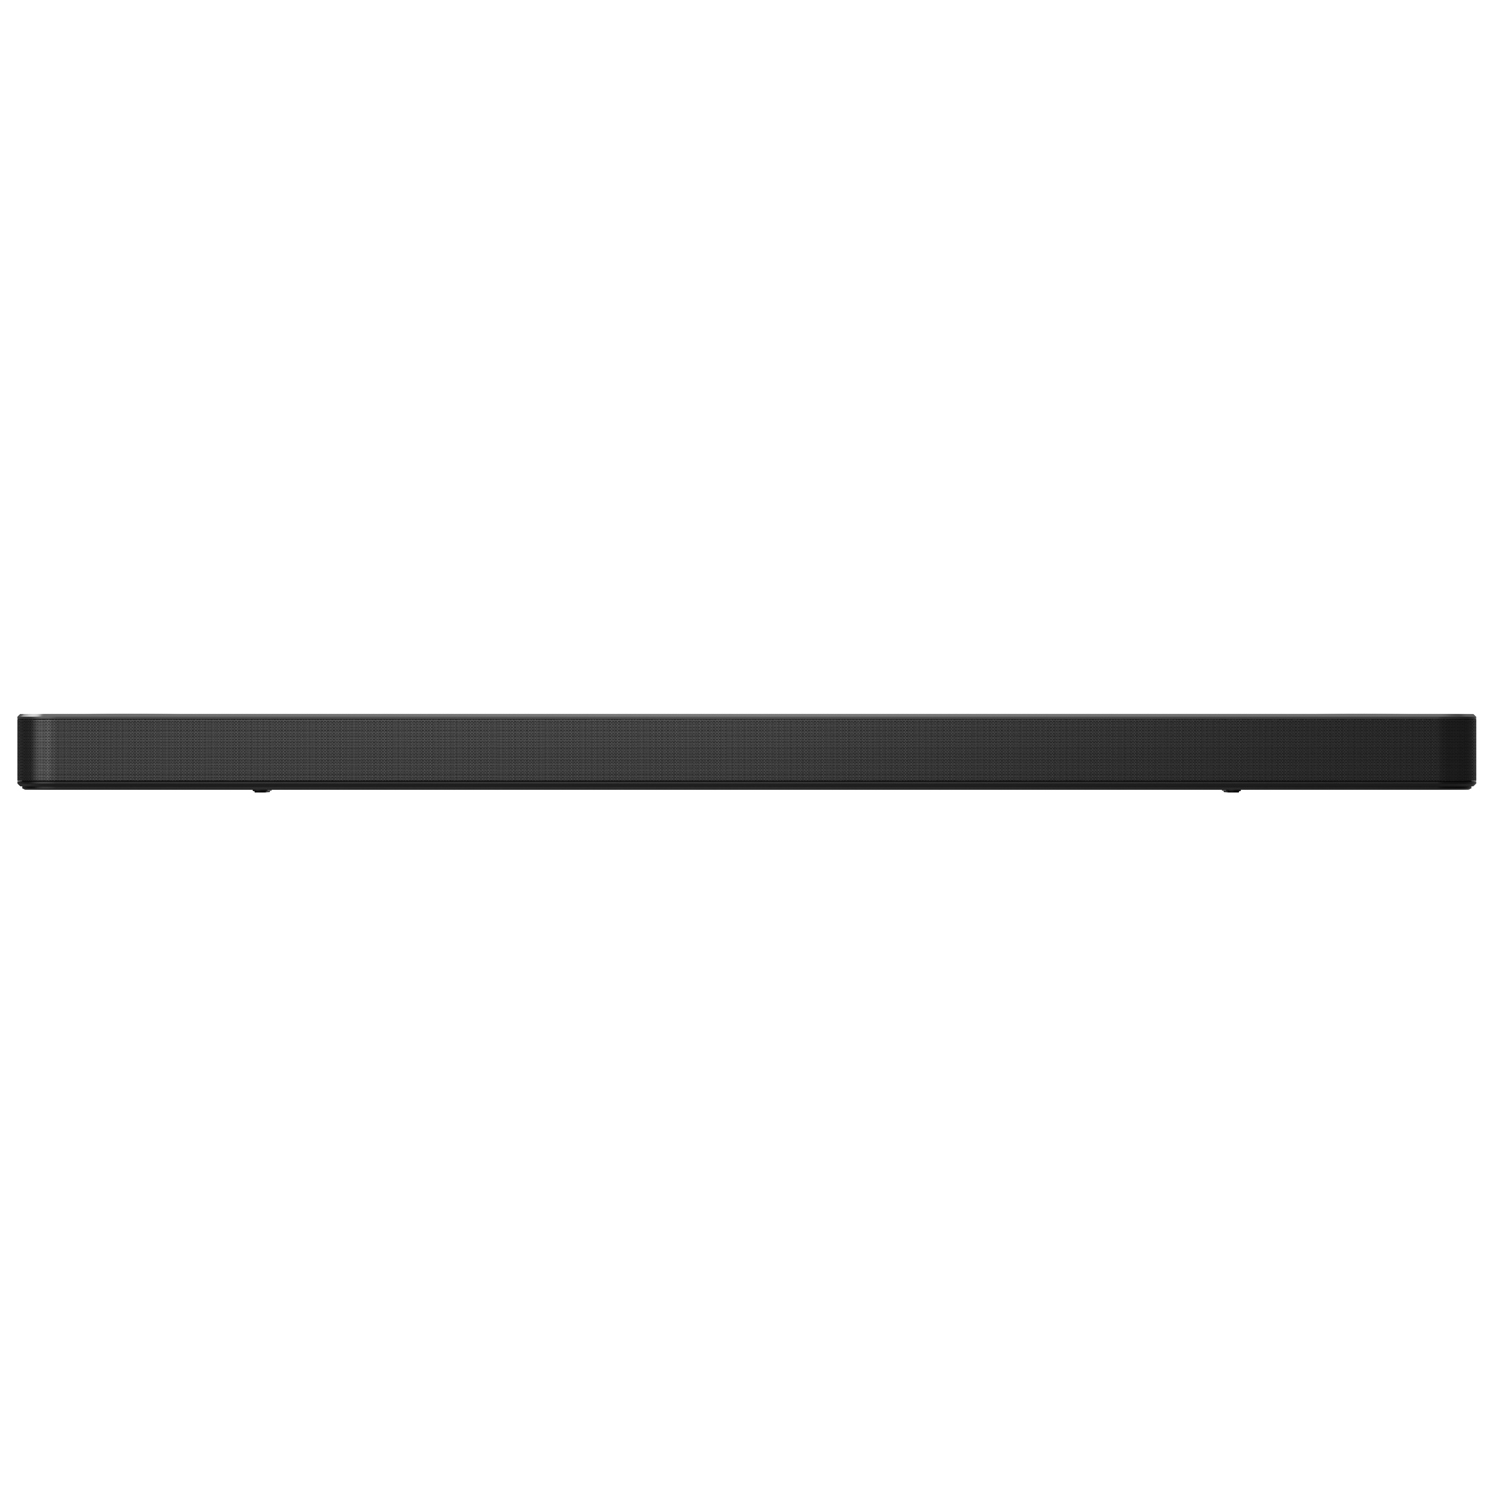 LG SN8YG 3.1.2ch Sound Bar w/ Meridian, Dolby Atmos, DTS:X 3D Surround Sound + Wireless Subwoofer Bundle with 2x Deco Gear HDMI Cable + 1 Year Extended Coverage + Streaming Entertainment Software Kit - image 4 of 10